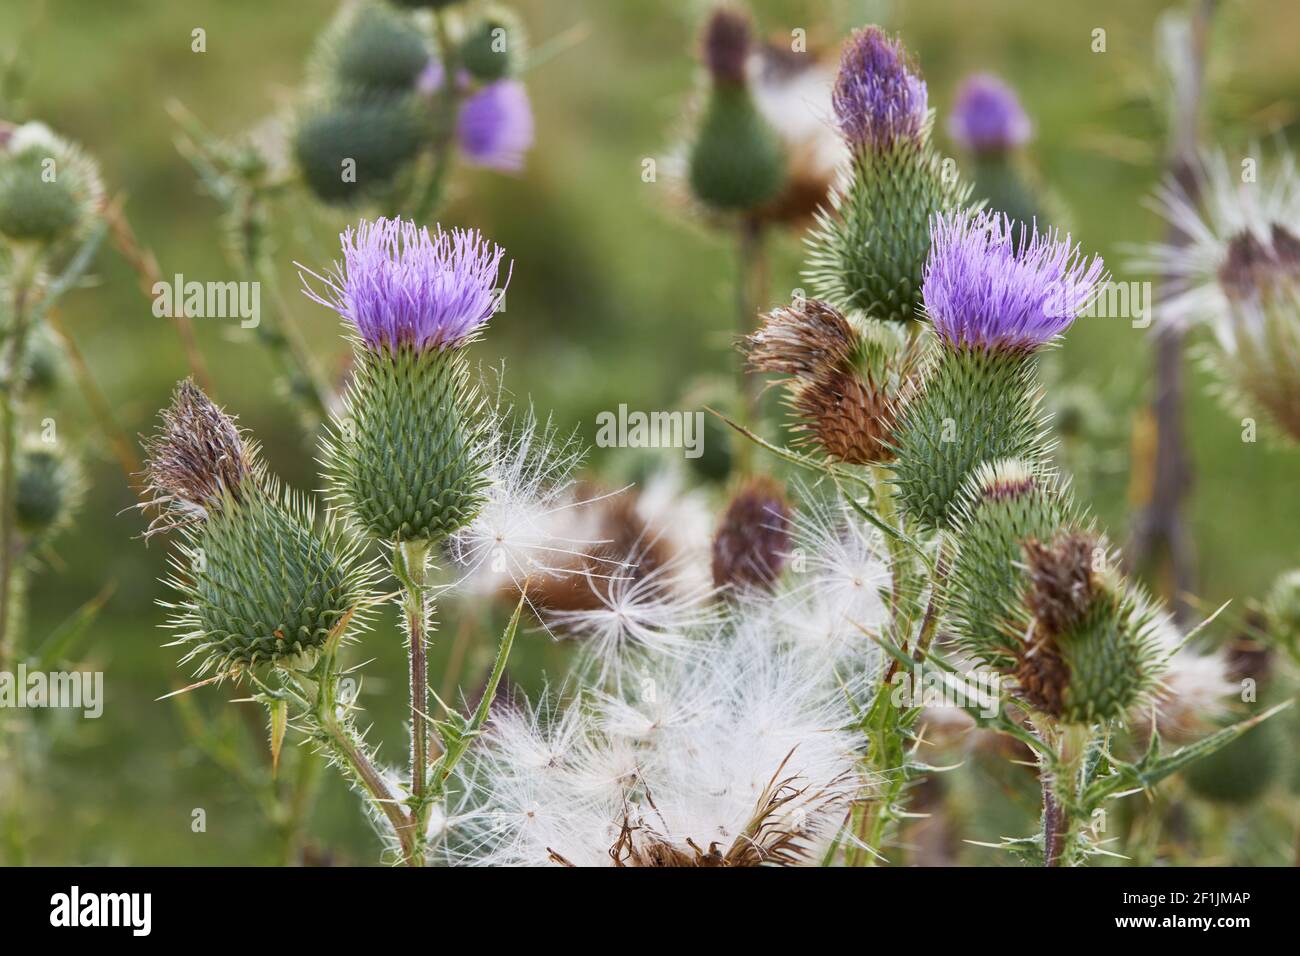 Cirsium vulgare, Spear thistle, Bull thistle, Common thistle, short lived thistle plant with spine tipped winged stems and leaves, pink purple flower Stock Photo